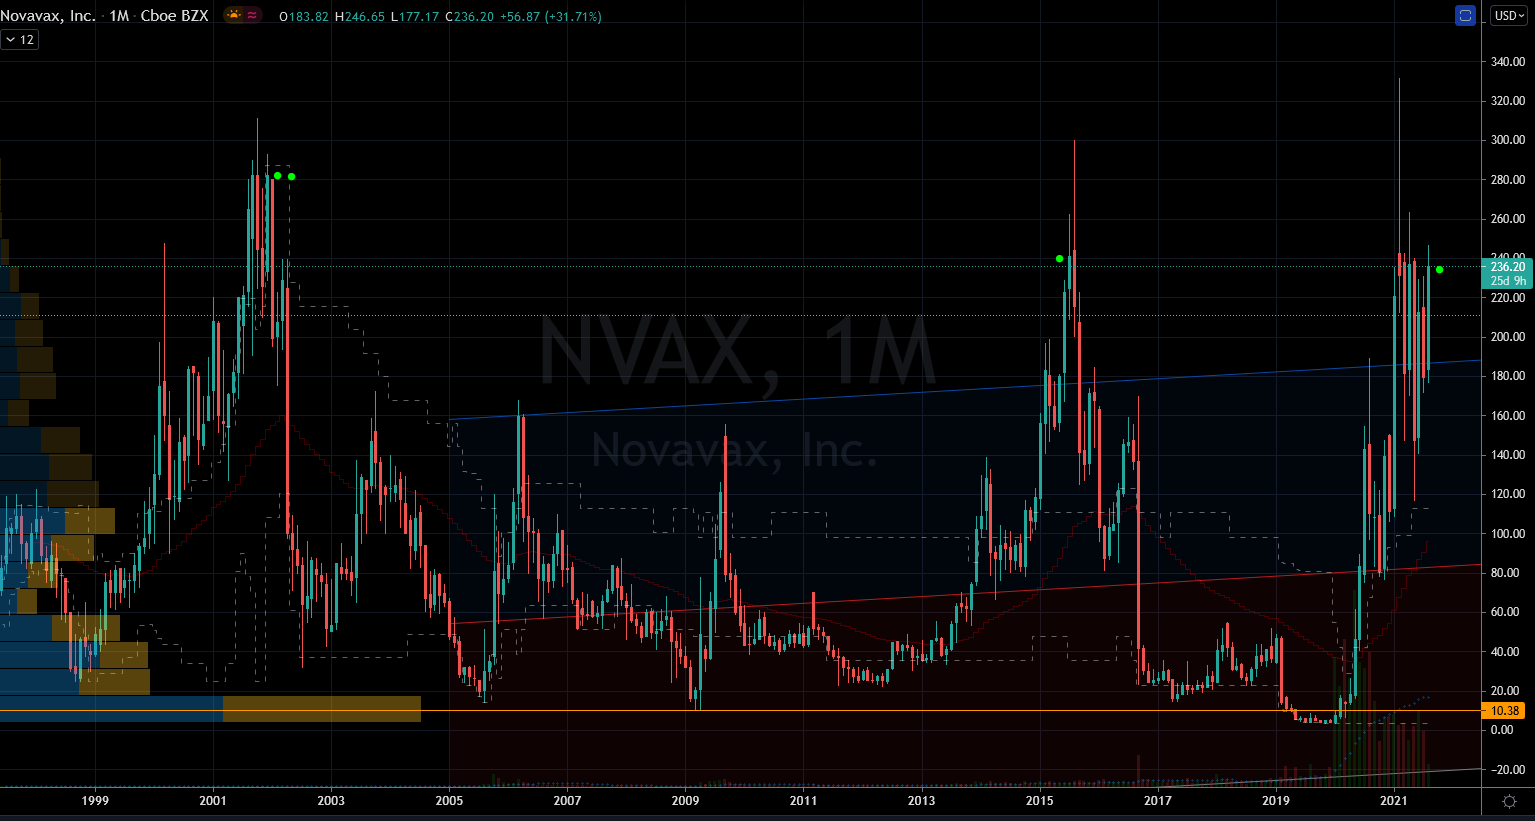 Novavax (NVAX) Stock Chart Showing Monthly Highest Monthly Closes